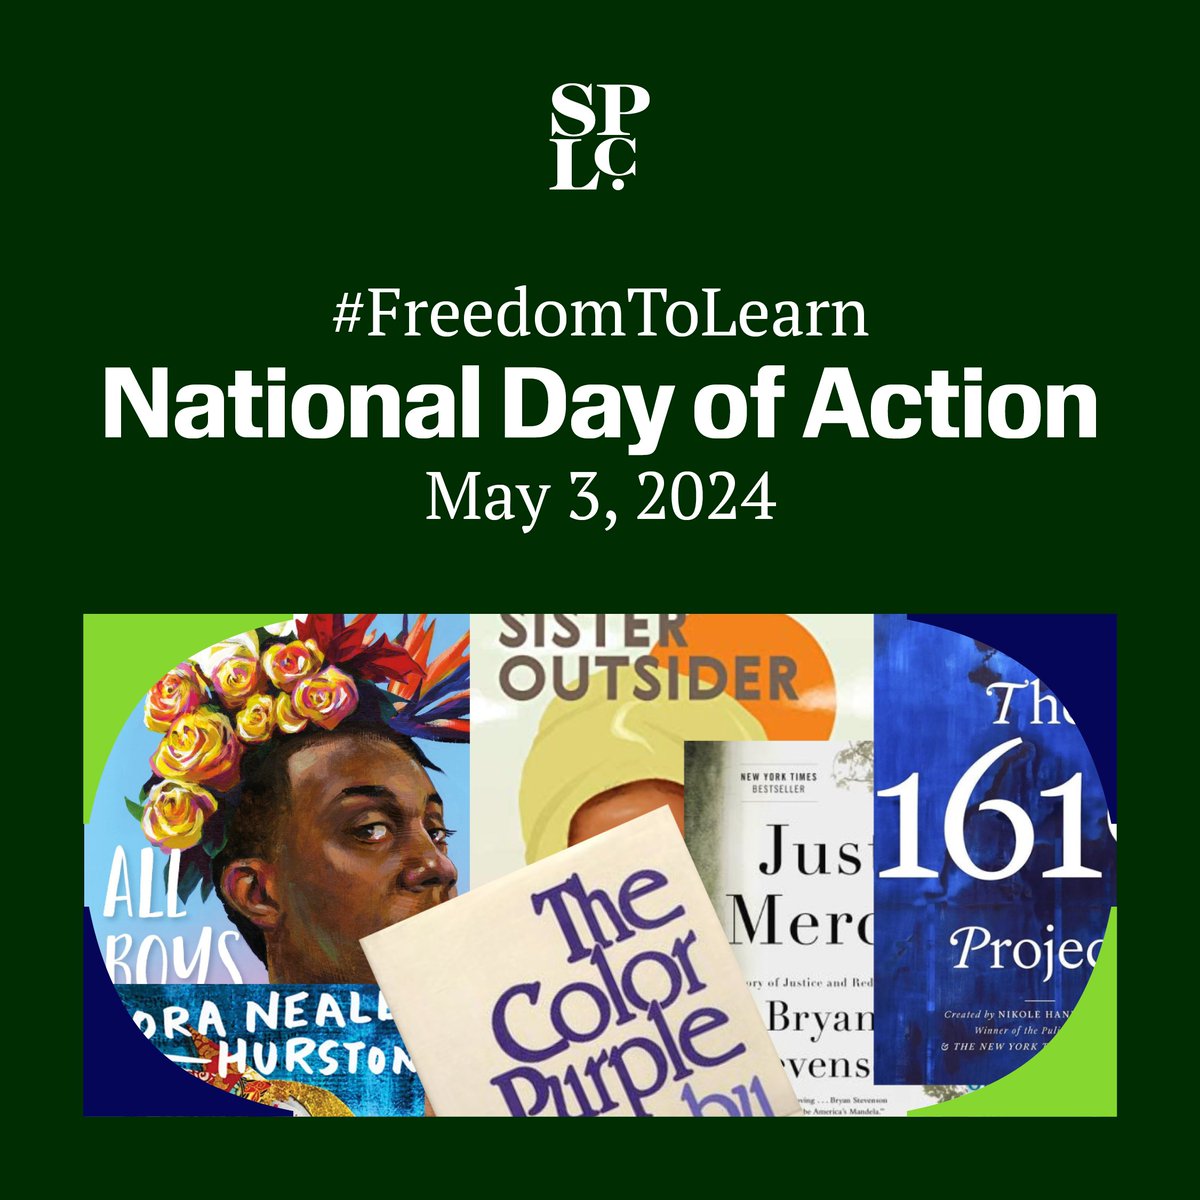 Today is the Freedom To Learn National Day of Action, a day of advocacy for inclusive education and young people’s freedom to read, learn and build a just future. #Freedomtolearn lfj.pub/3JG35Bw